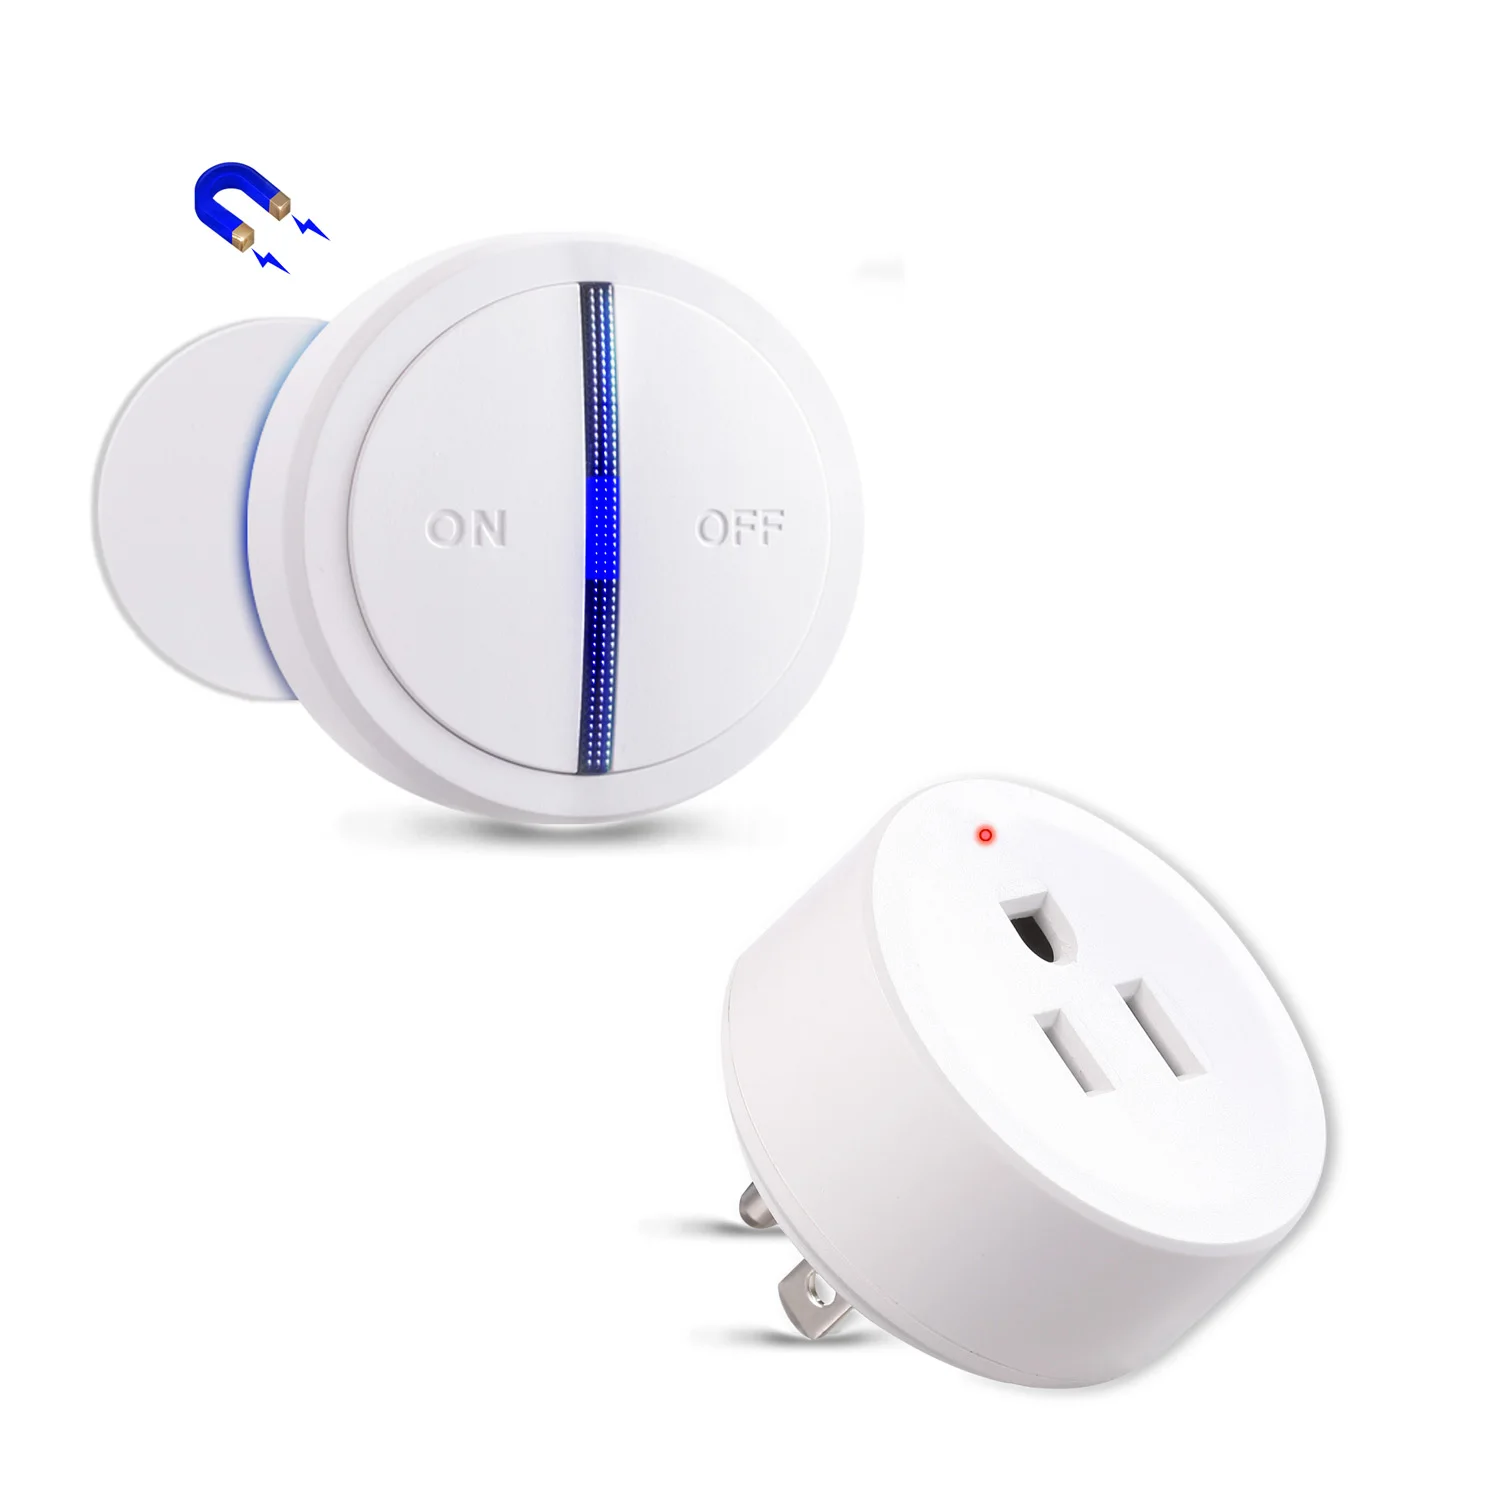 

Smart home mini Socket WiFi Outlet 15A Compatible with Alexa Google Assistant voice control smart plugs usa wifi Timing switch